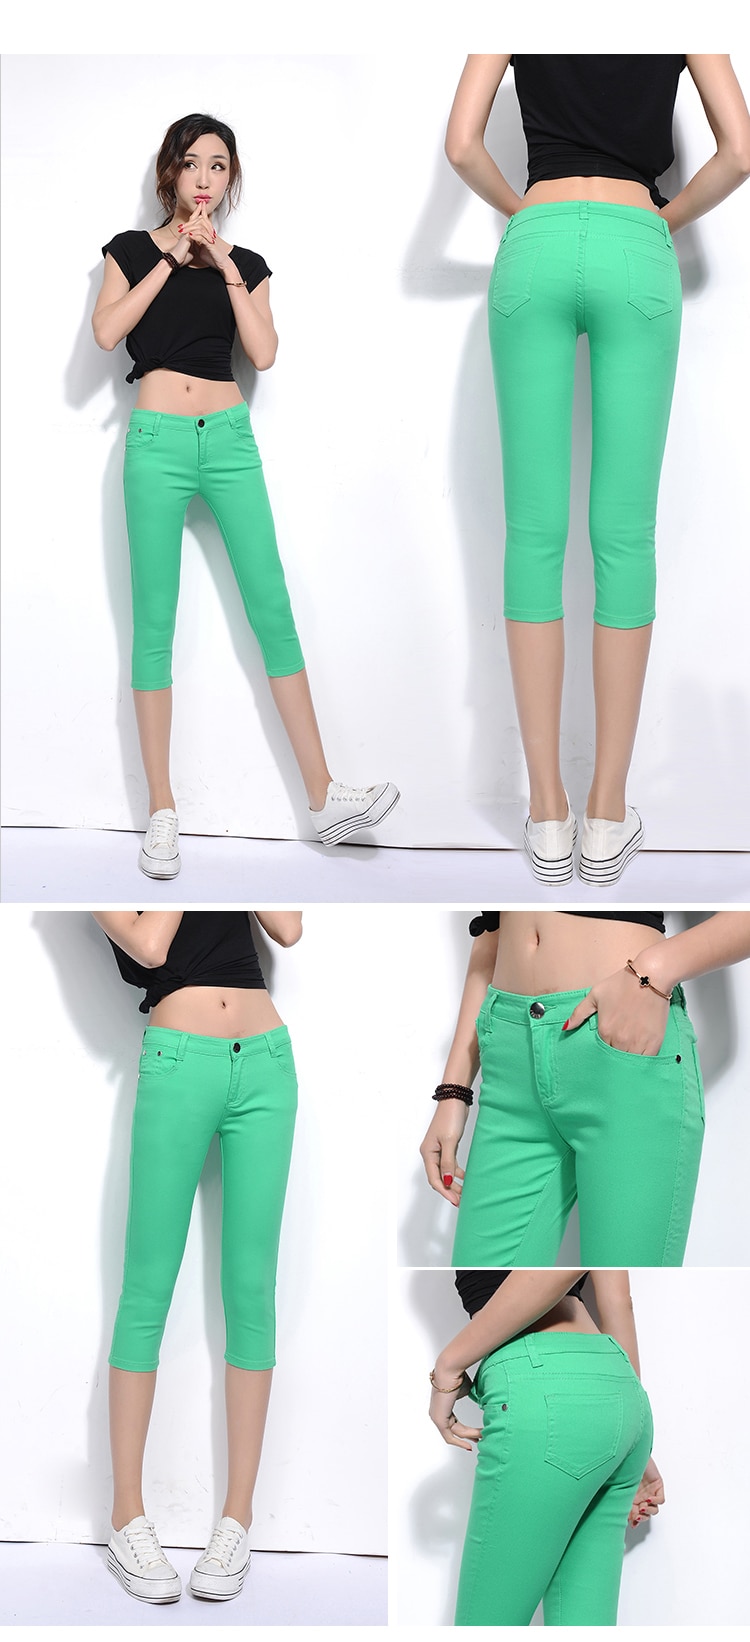 2018 New Spring Leisure Stretch Candy Color Cropped pants Female pencil pants Thin section Trousers Female feet Breeches (18)